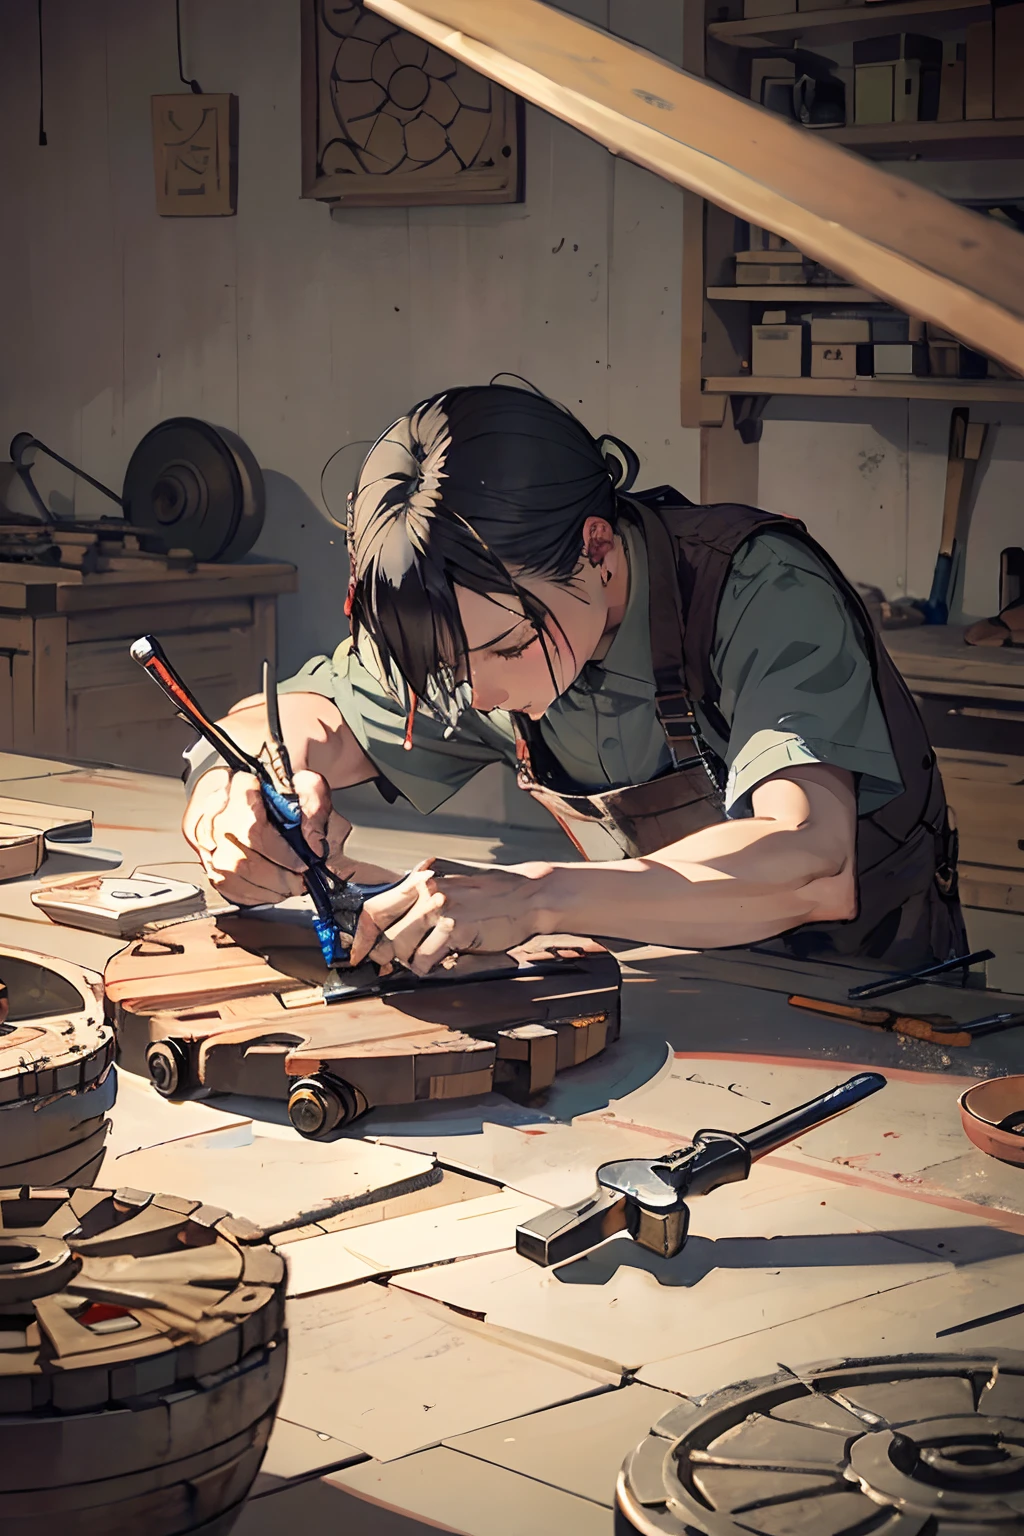 Illustrate a skilled craftsman meticulously working on common tools like wheels and vehicles. Emphasize the craftsmanship and precision in the work.
Keywords: Craftsman, boy, chinese artwork, tools, wheel, expertise, precision.